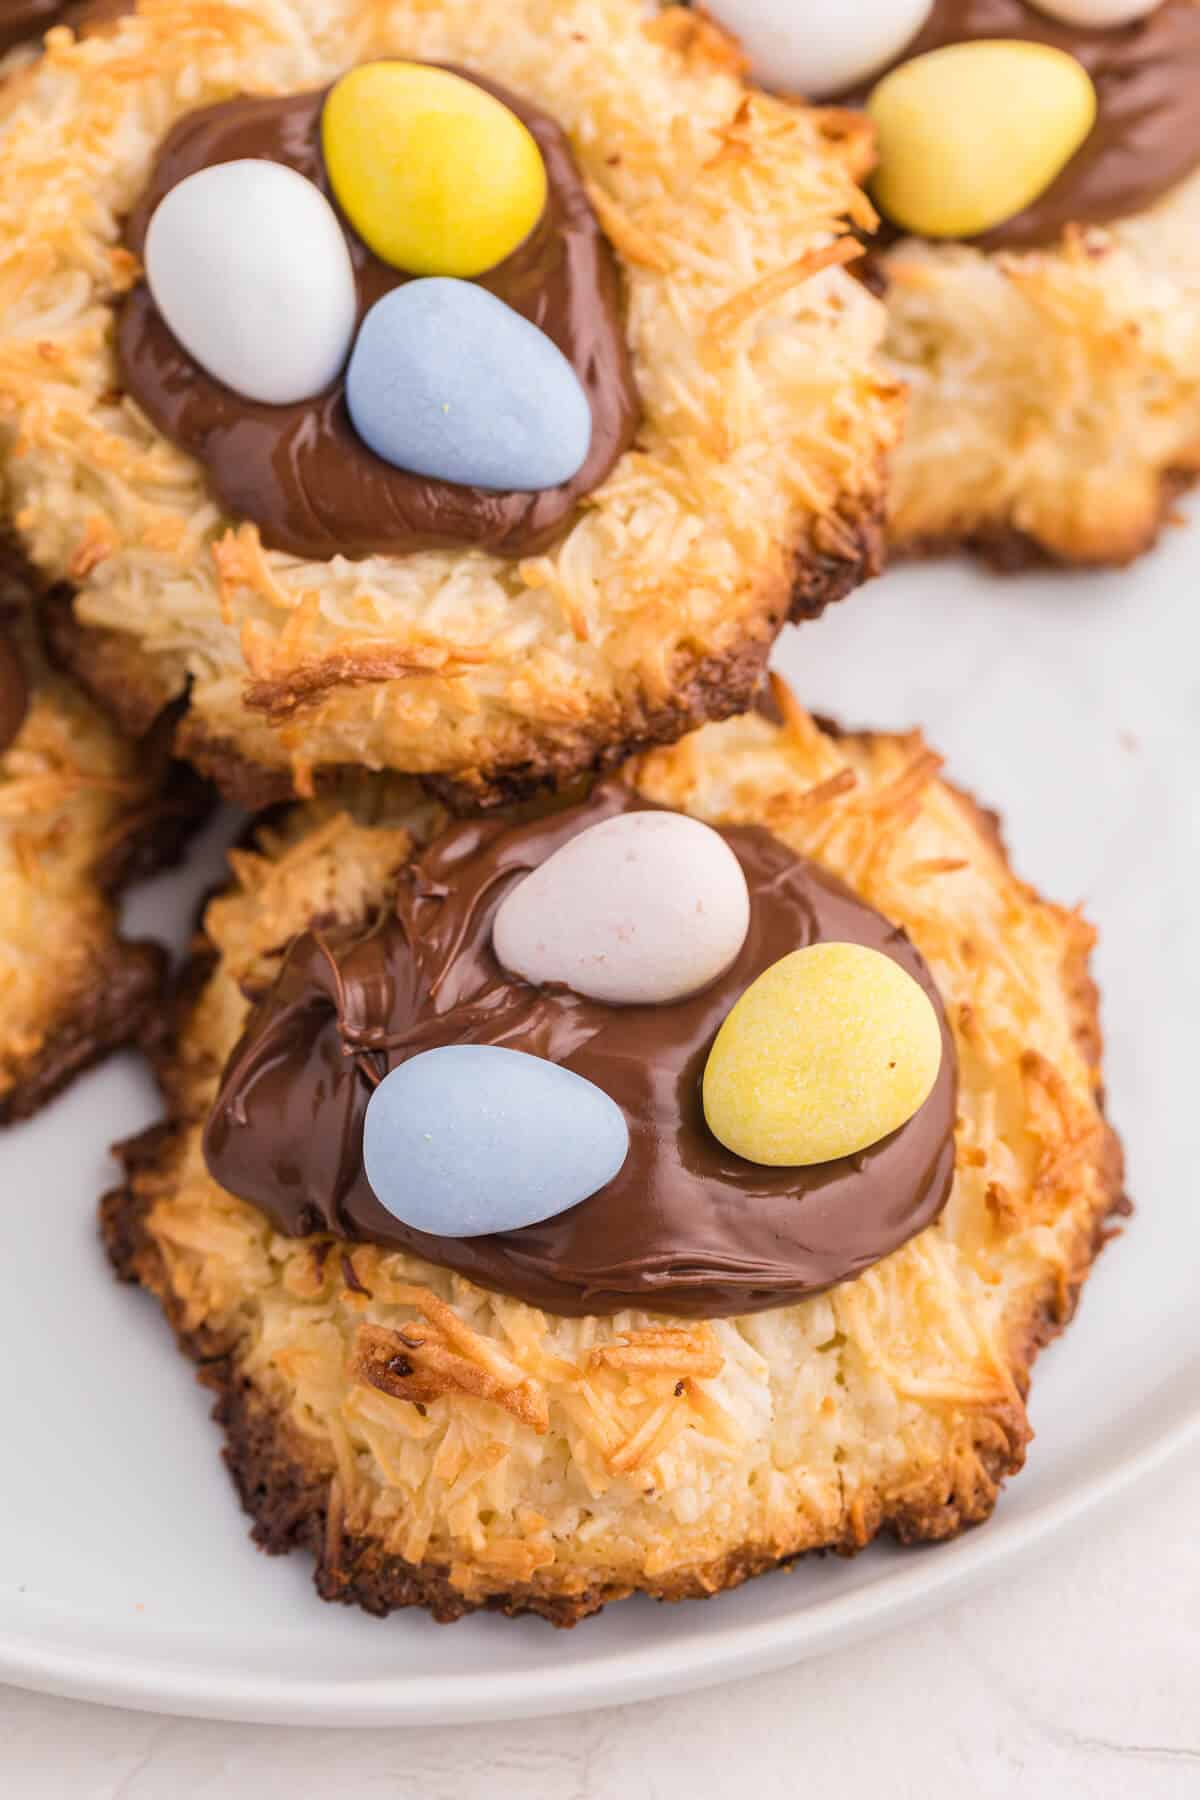 Coconut Macaroon Nutella Cookie Nests on a plate.